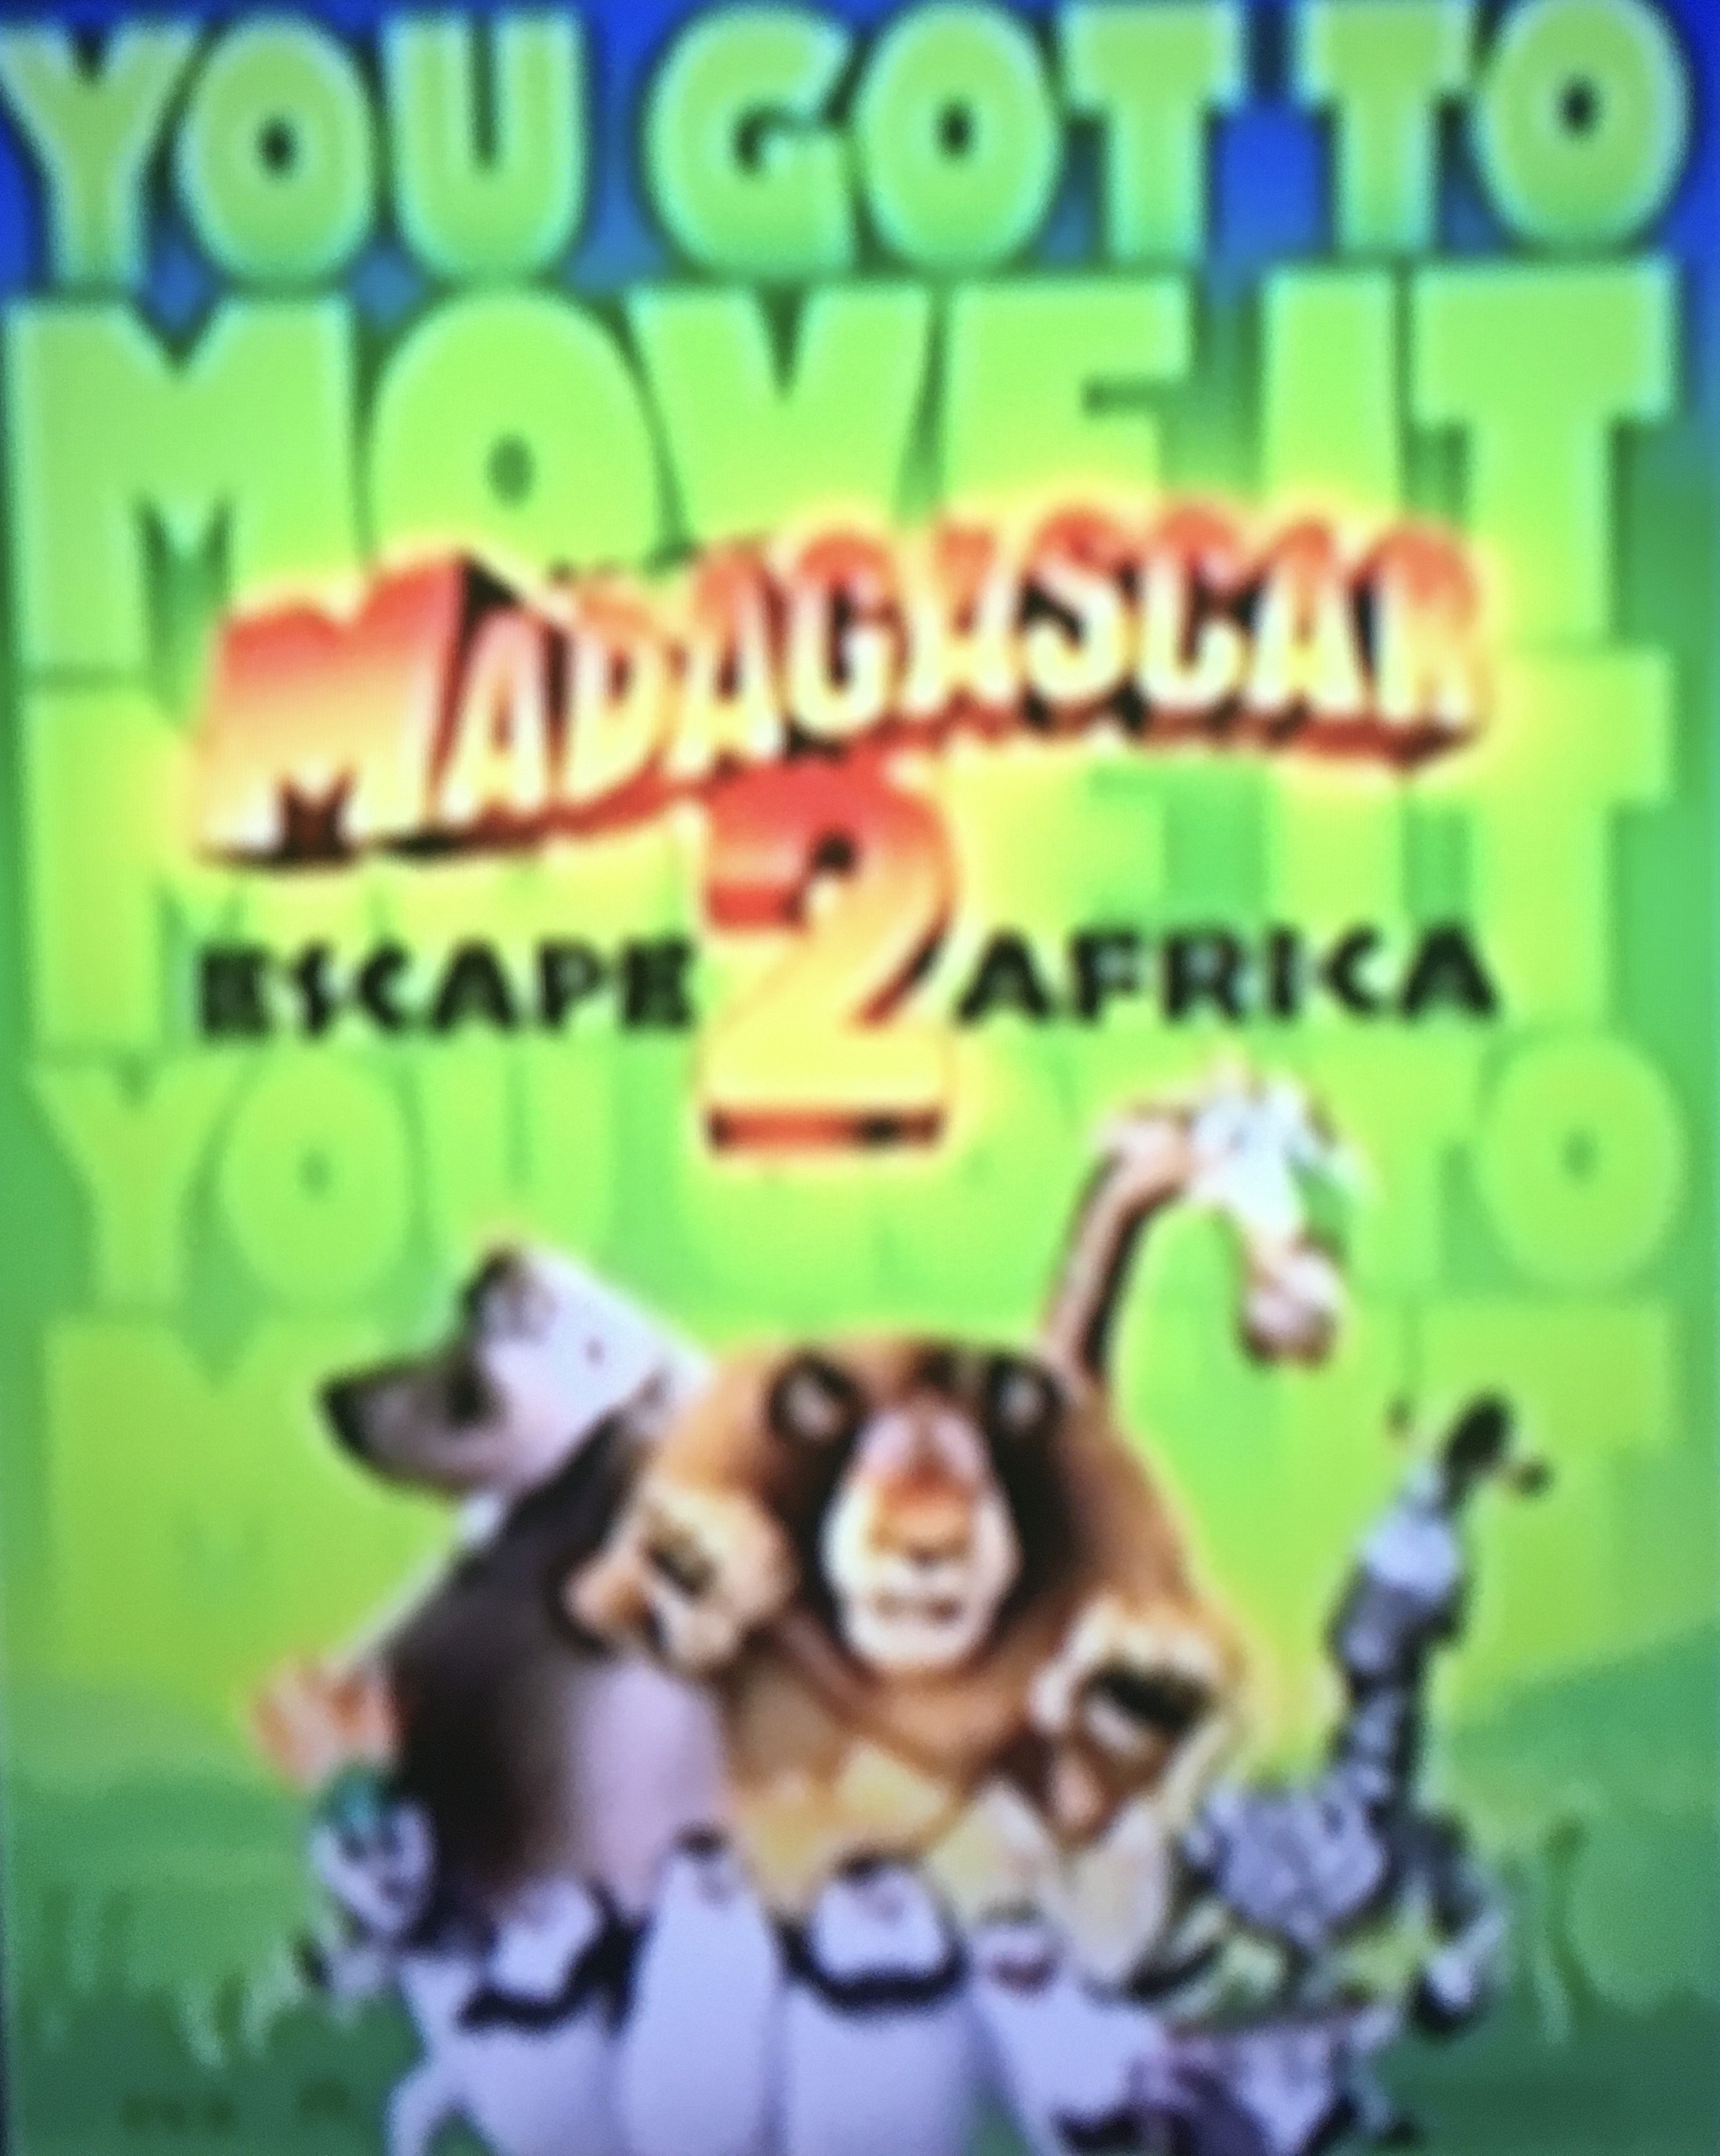 YARN, So you're Moto Moto?, Madagascar: Escape 2 Africa (2008), Video  clips by quotes, 37669a8c